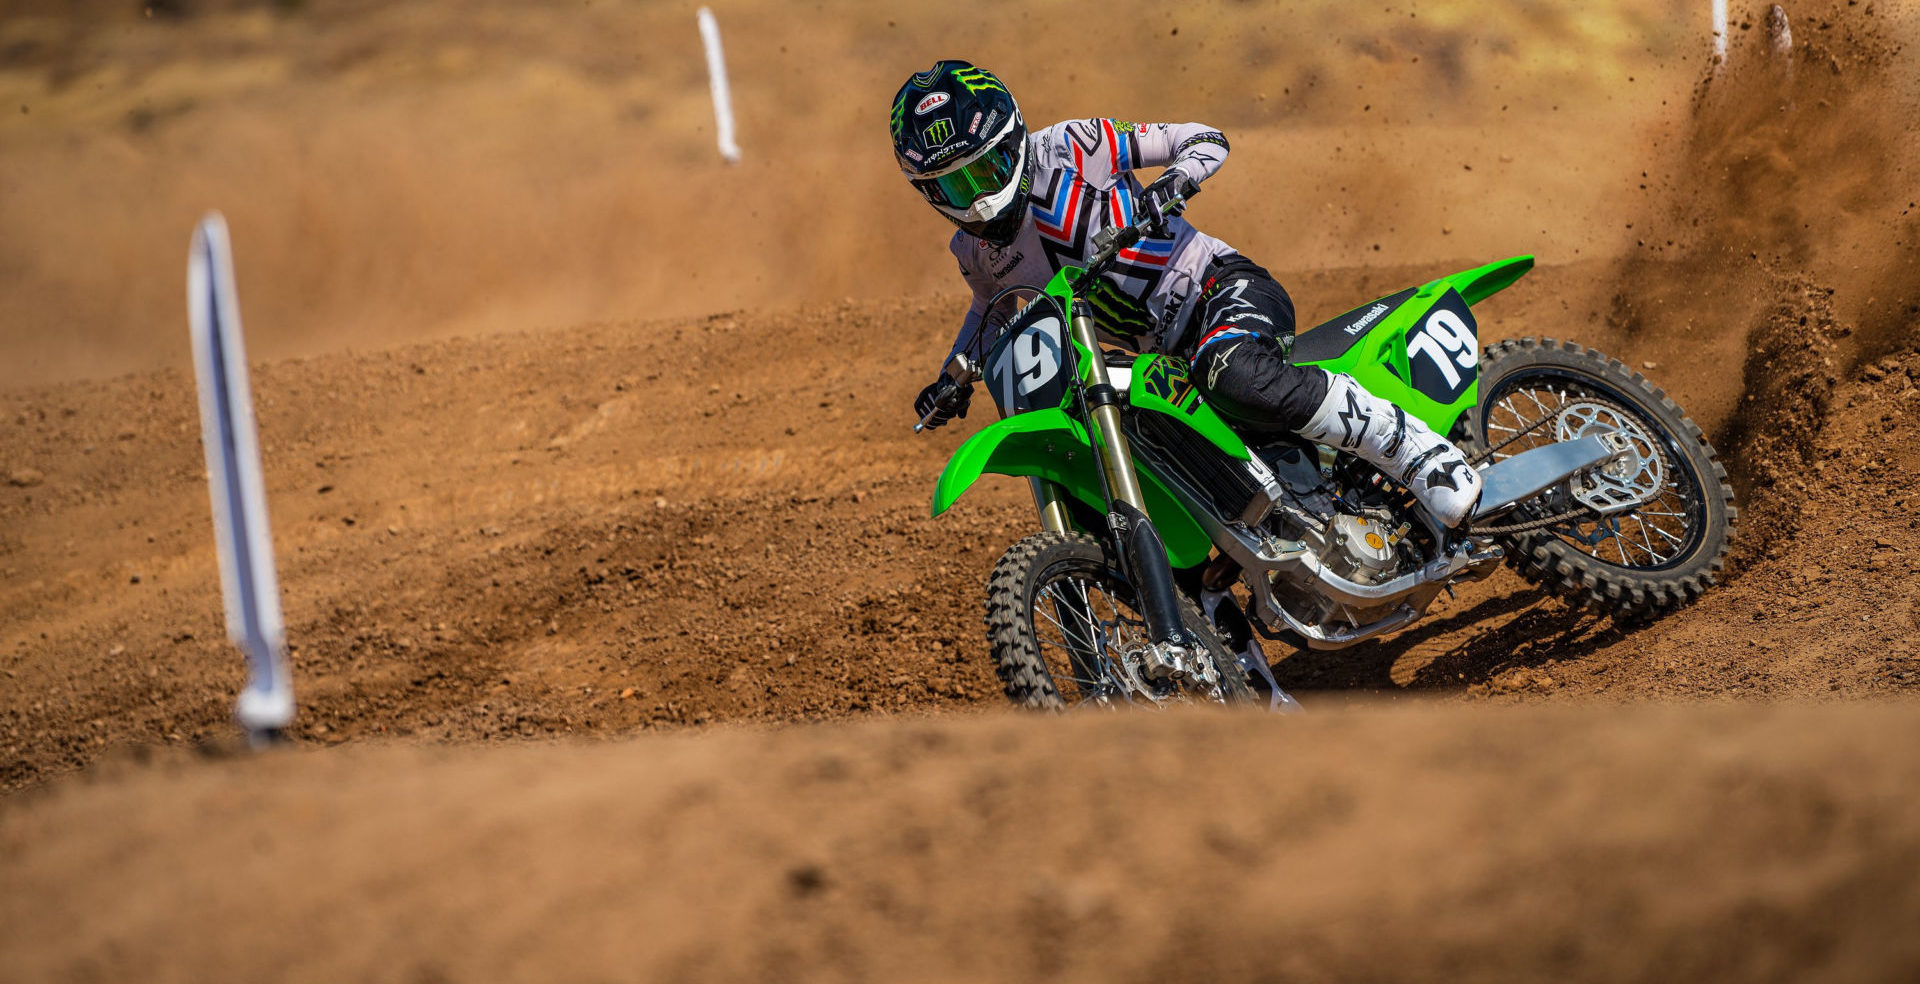 Introduces All-New KX250, Other 2021 Models - Roadracing World Magazine | Motorcycle Riding, Racing & Tech News